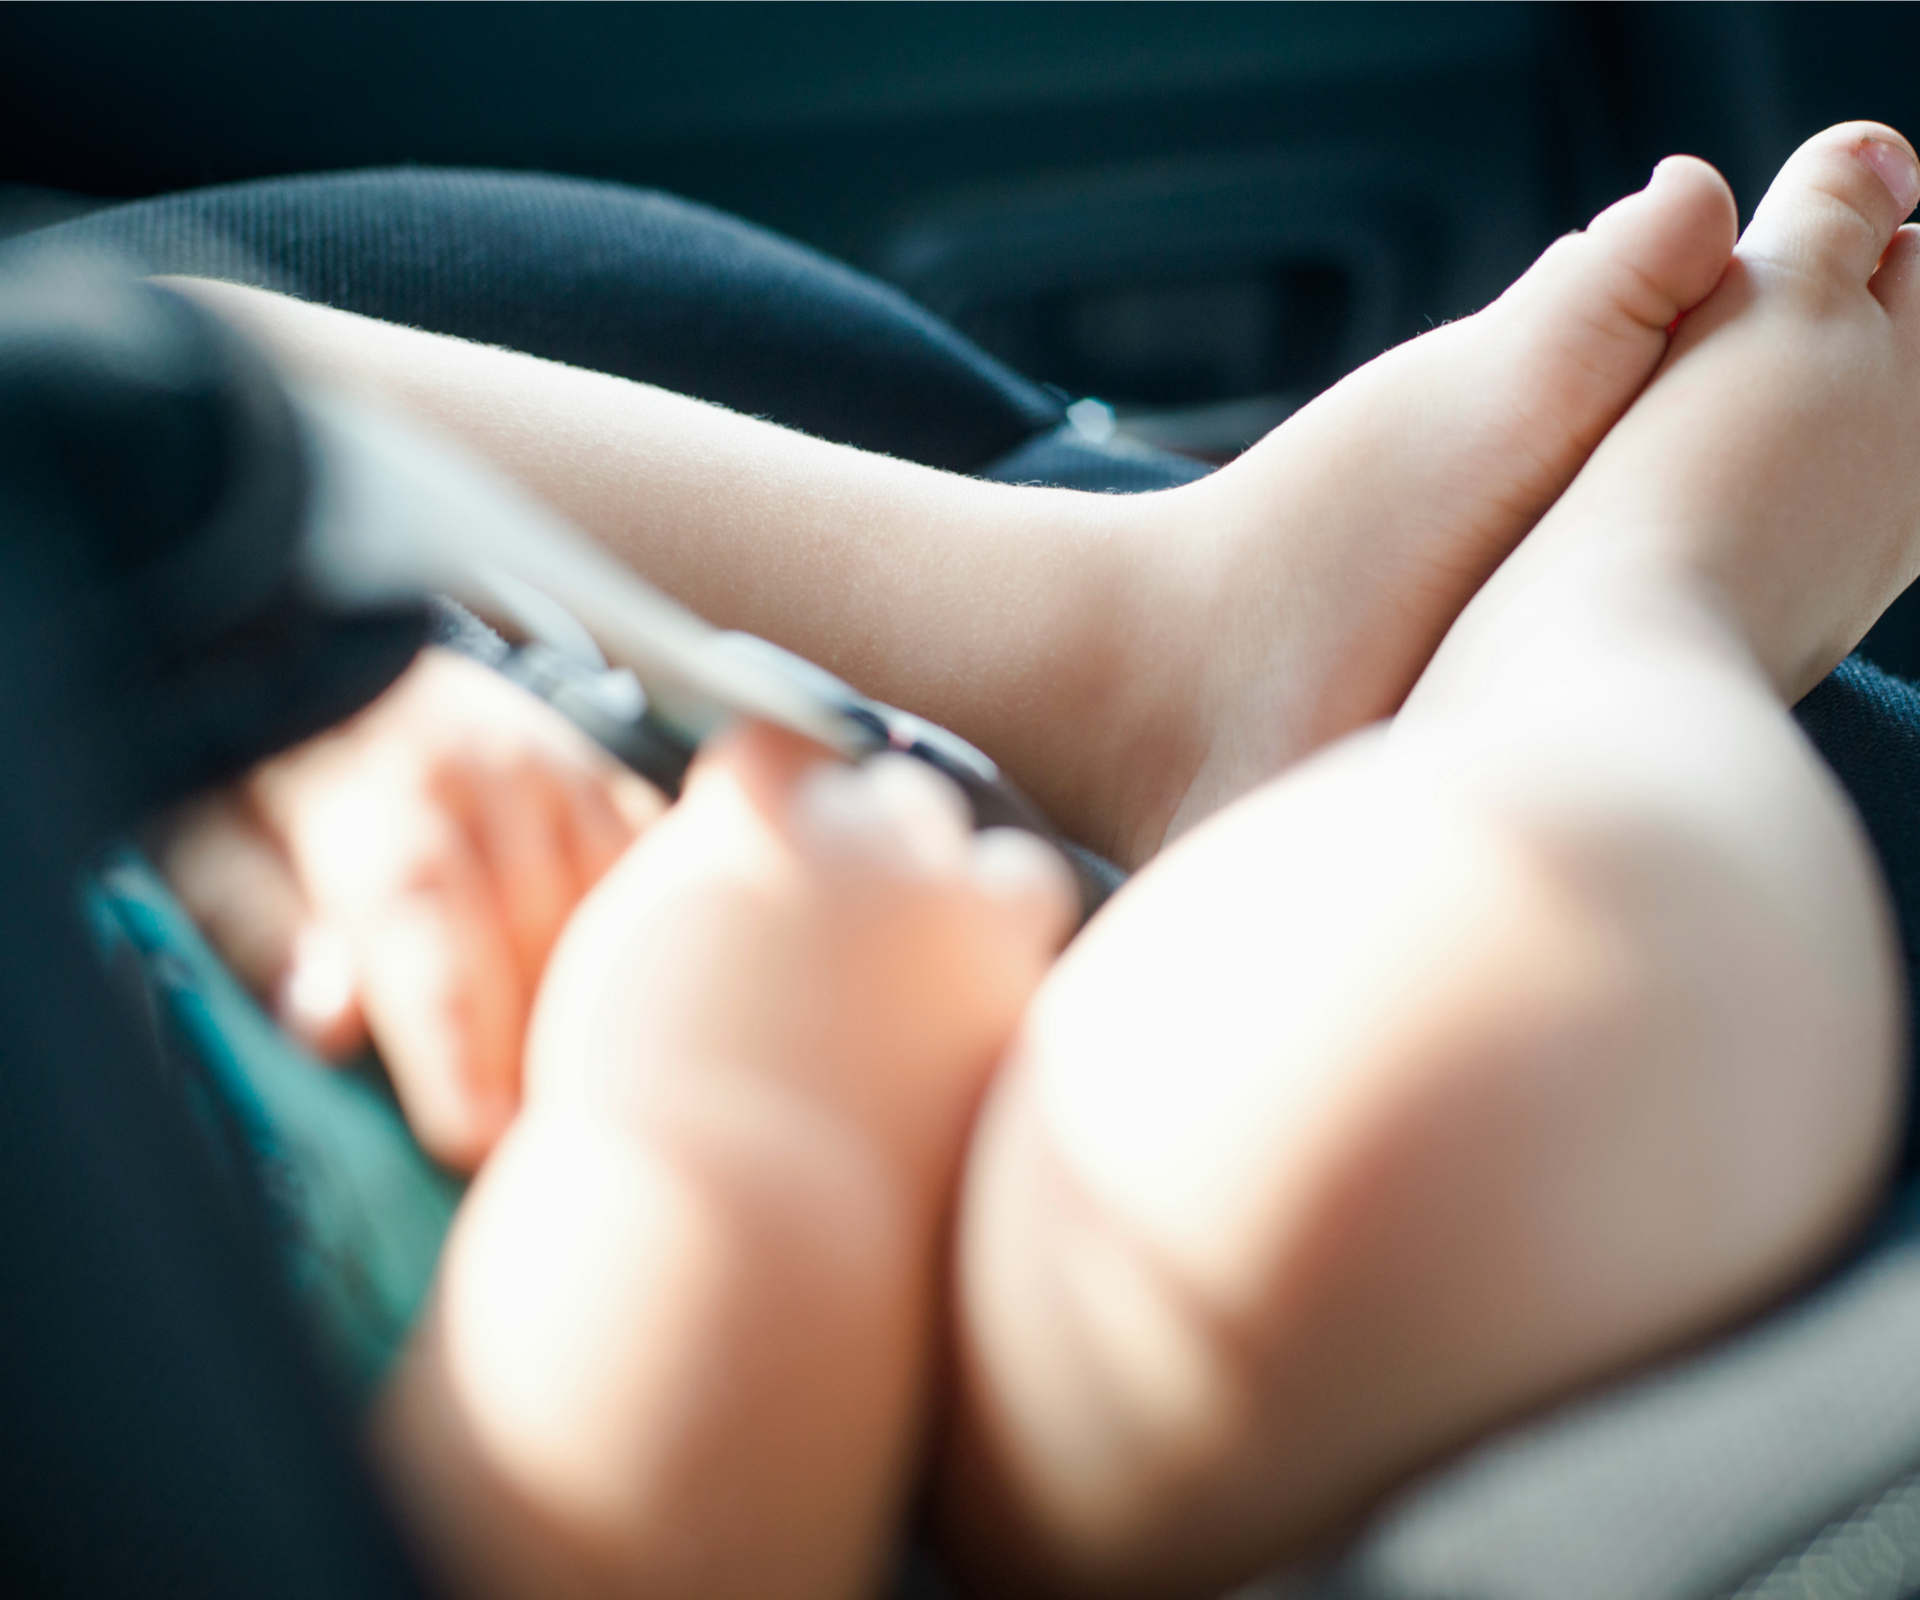 Dad left baby in the car to visit strip club